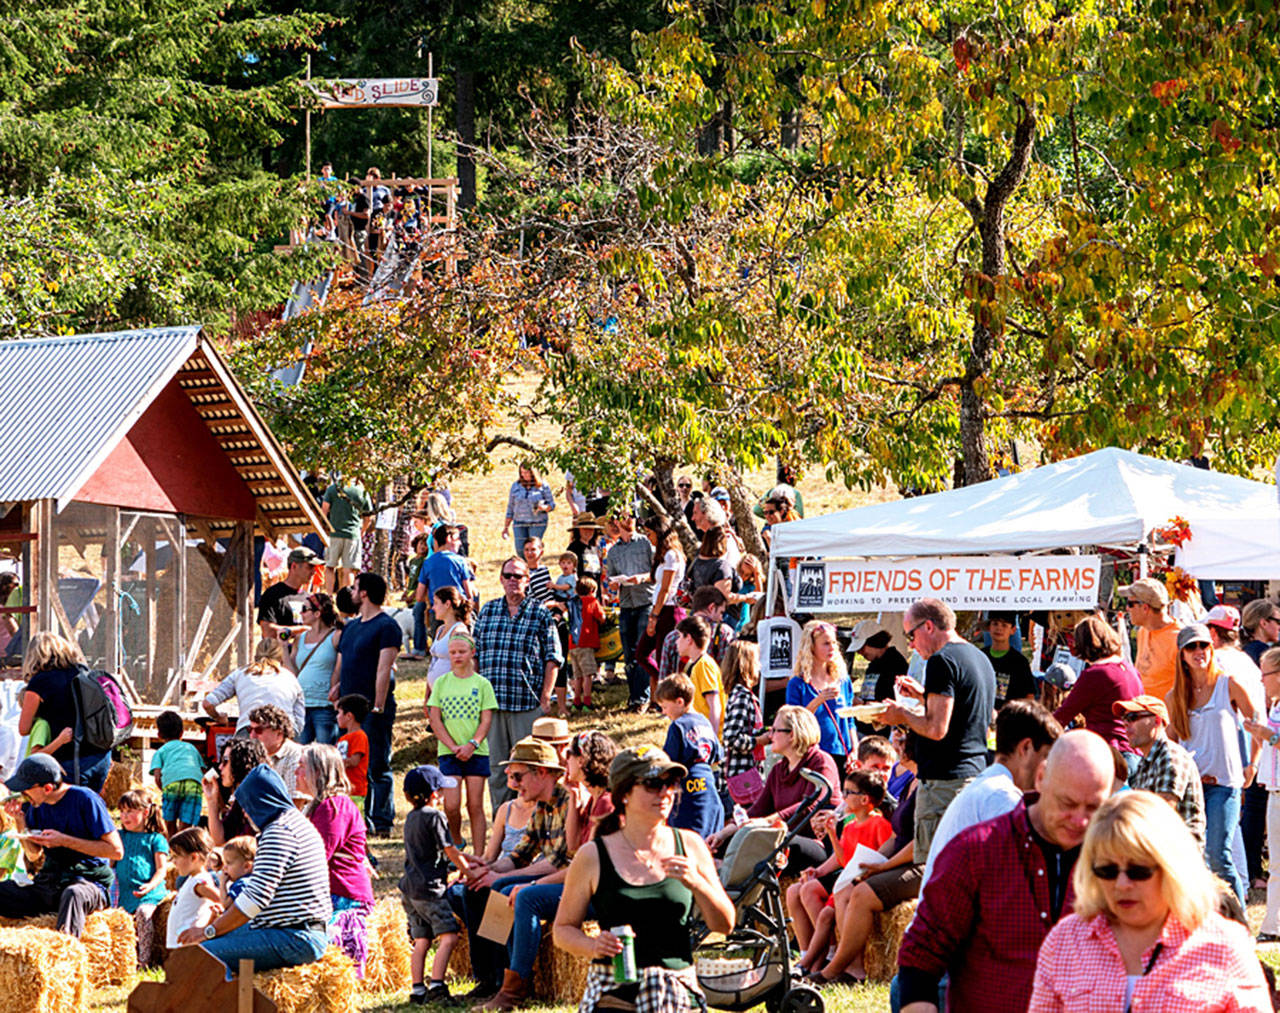 Photo courtesy of Friends of the Farms | The 18th annual Bainbridge Island Harvest Fair, hosted by Friends of the Farms, will return to Johnson Farm from 11 a.m. to 5 p.m. Sunday, Sept. 22.